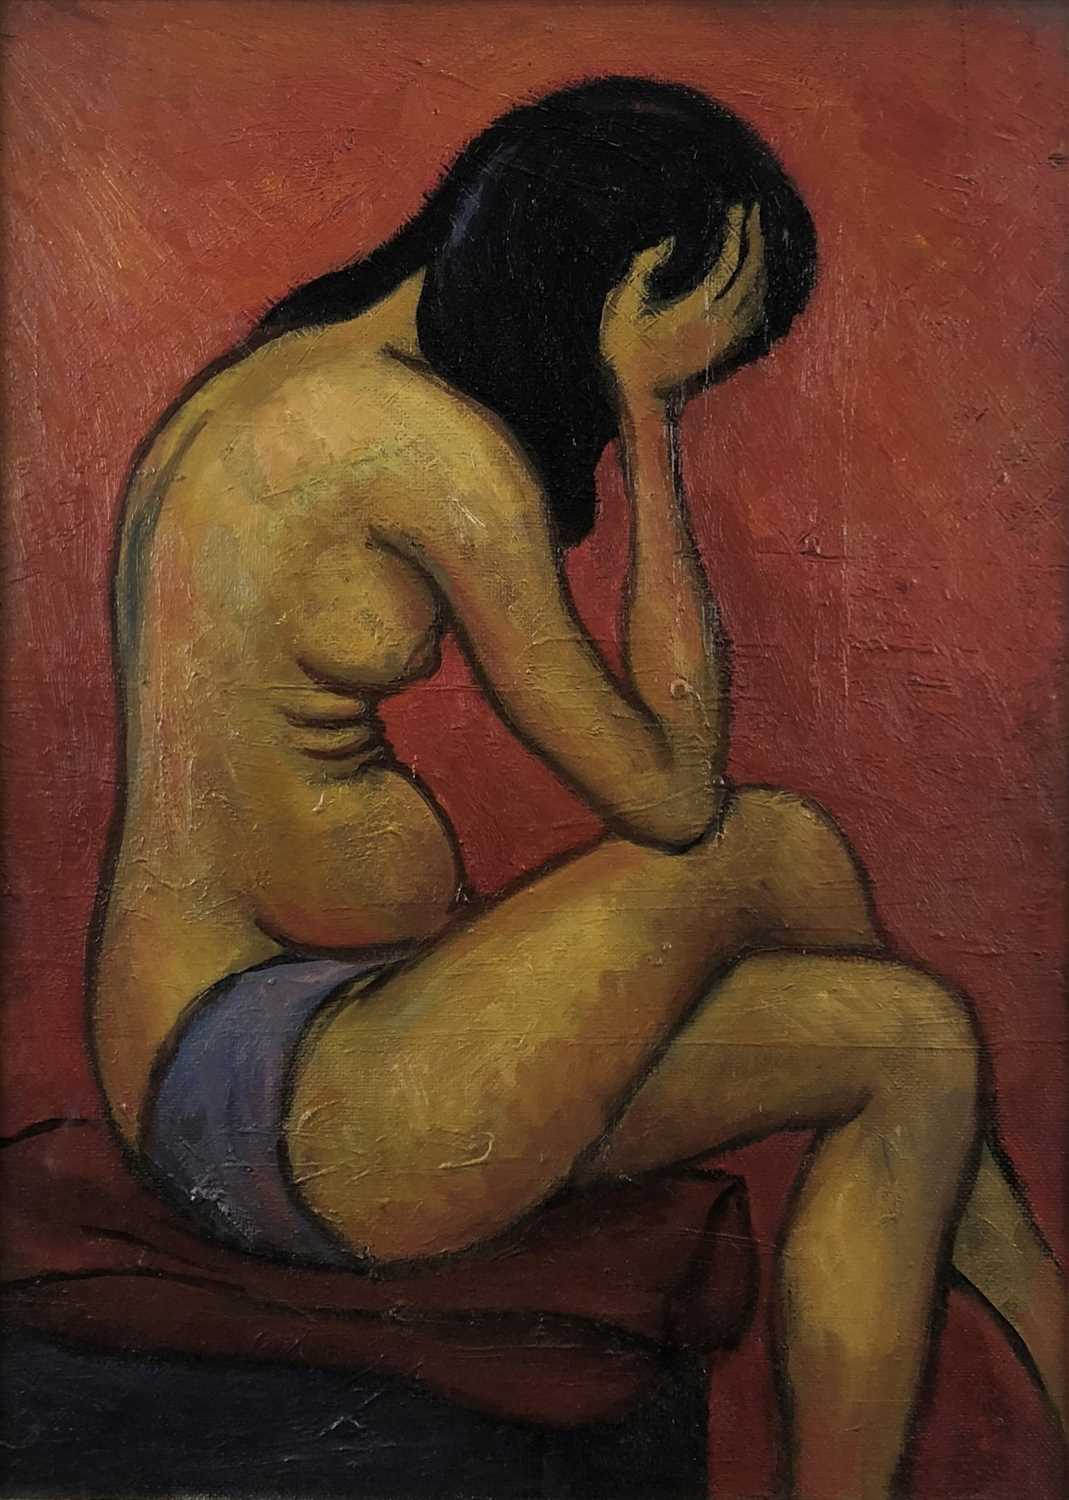 Lot 59 - Helen Steinthal (Welsh School, 1911-1991), Nude Study of a Lady with Black Hair and Abstract